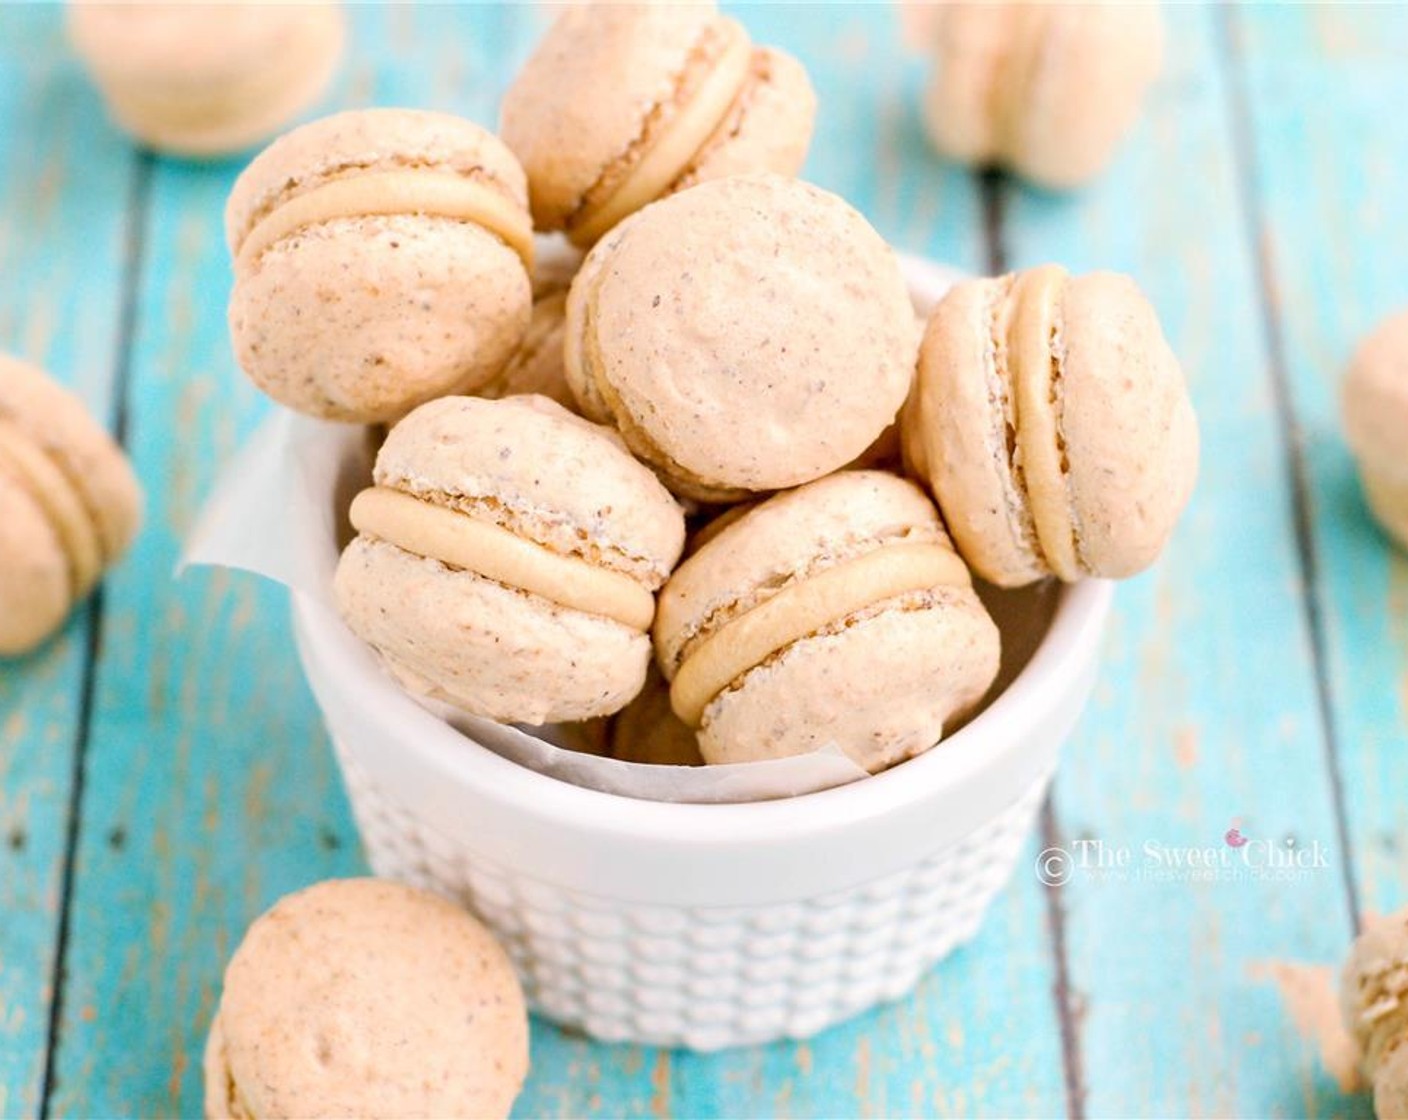 step 17 Macarons should be placed in the fridge for 24 hours before eating. This is how they mature and reach their full flavor. You can eat one right away, but when you eat one the next day it will be so much better. Be patient and enjoy!